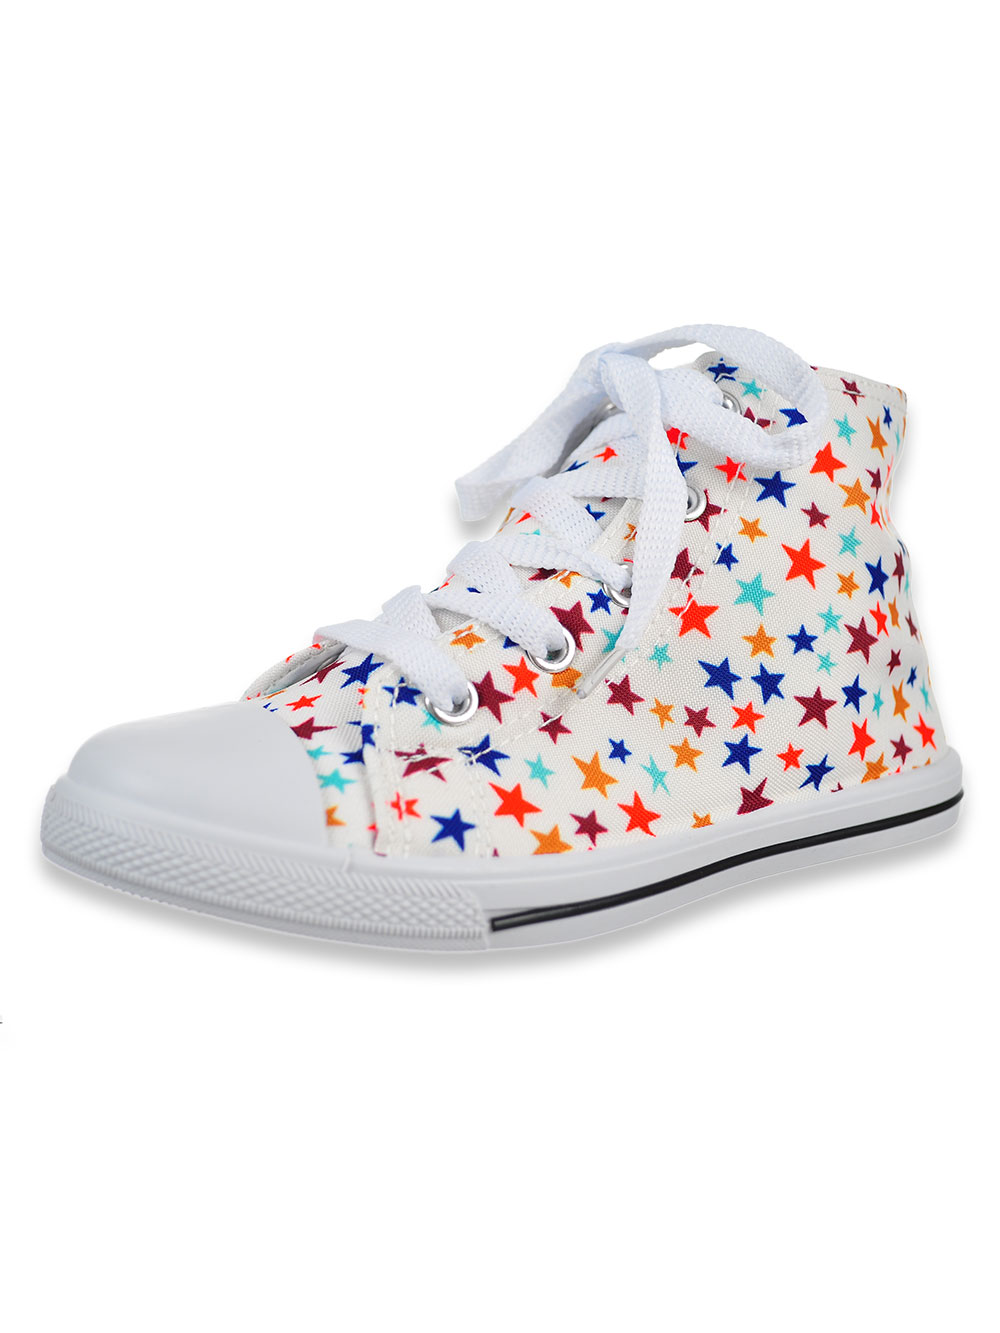 Girls' Star Canvas Sneakers by Olivia 